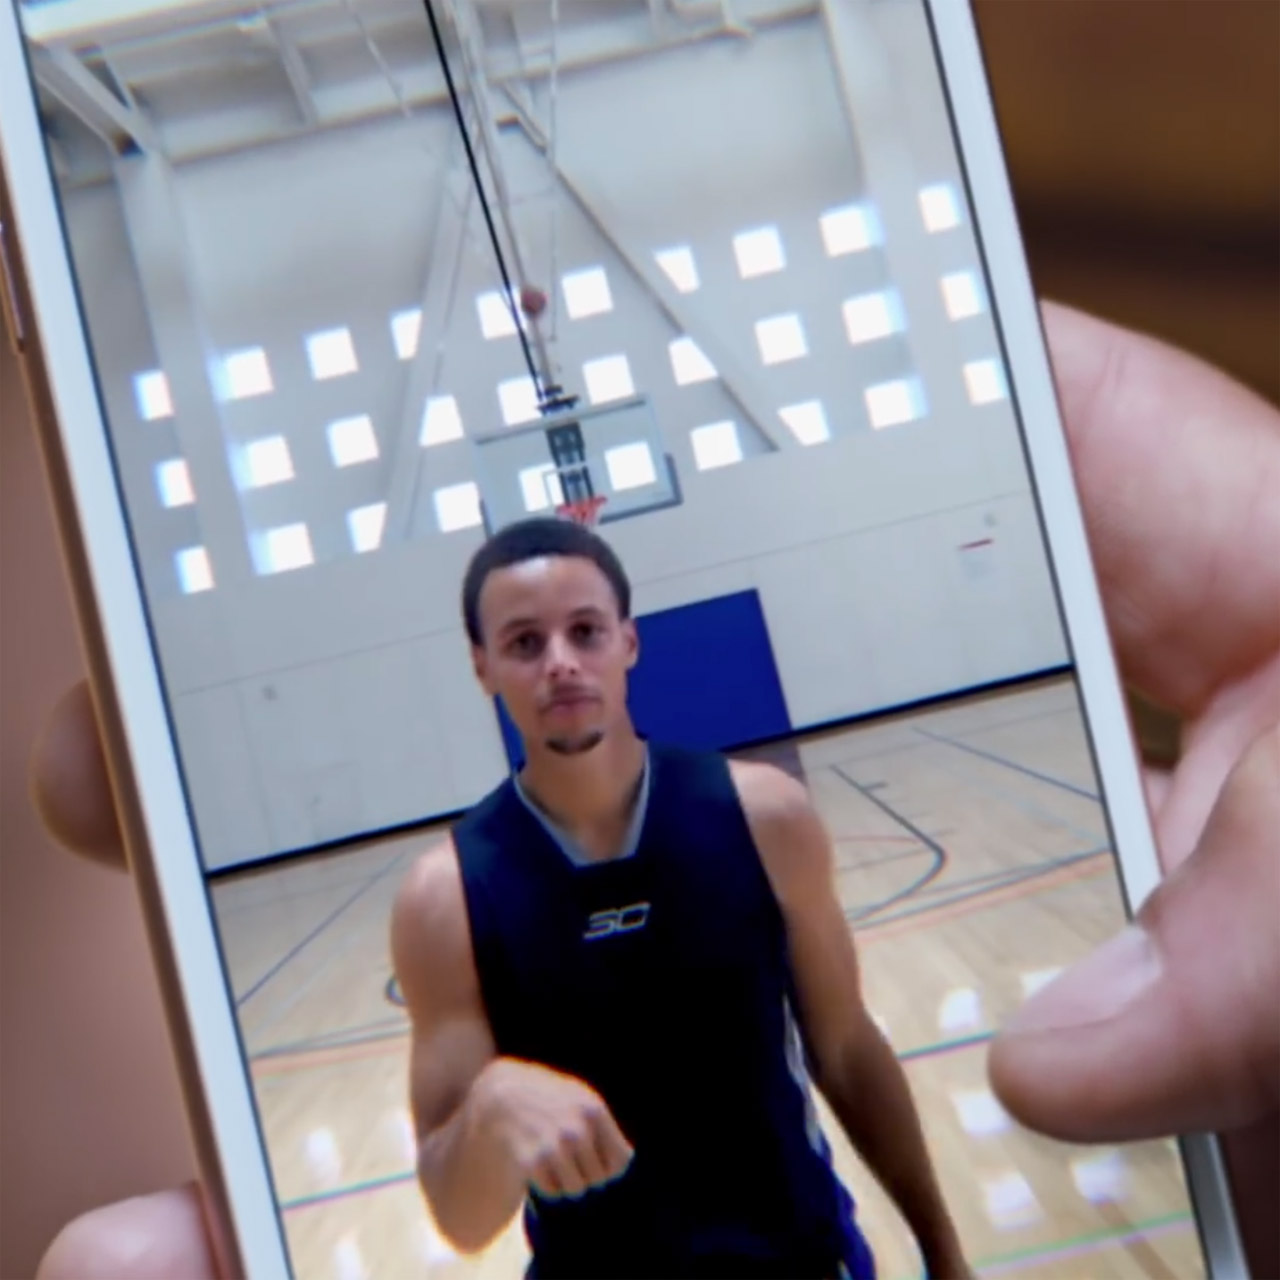 Steph Curry make half court shot in ad for Apple iPhone 6s with Live Photos